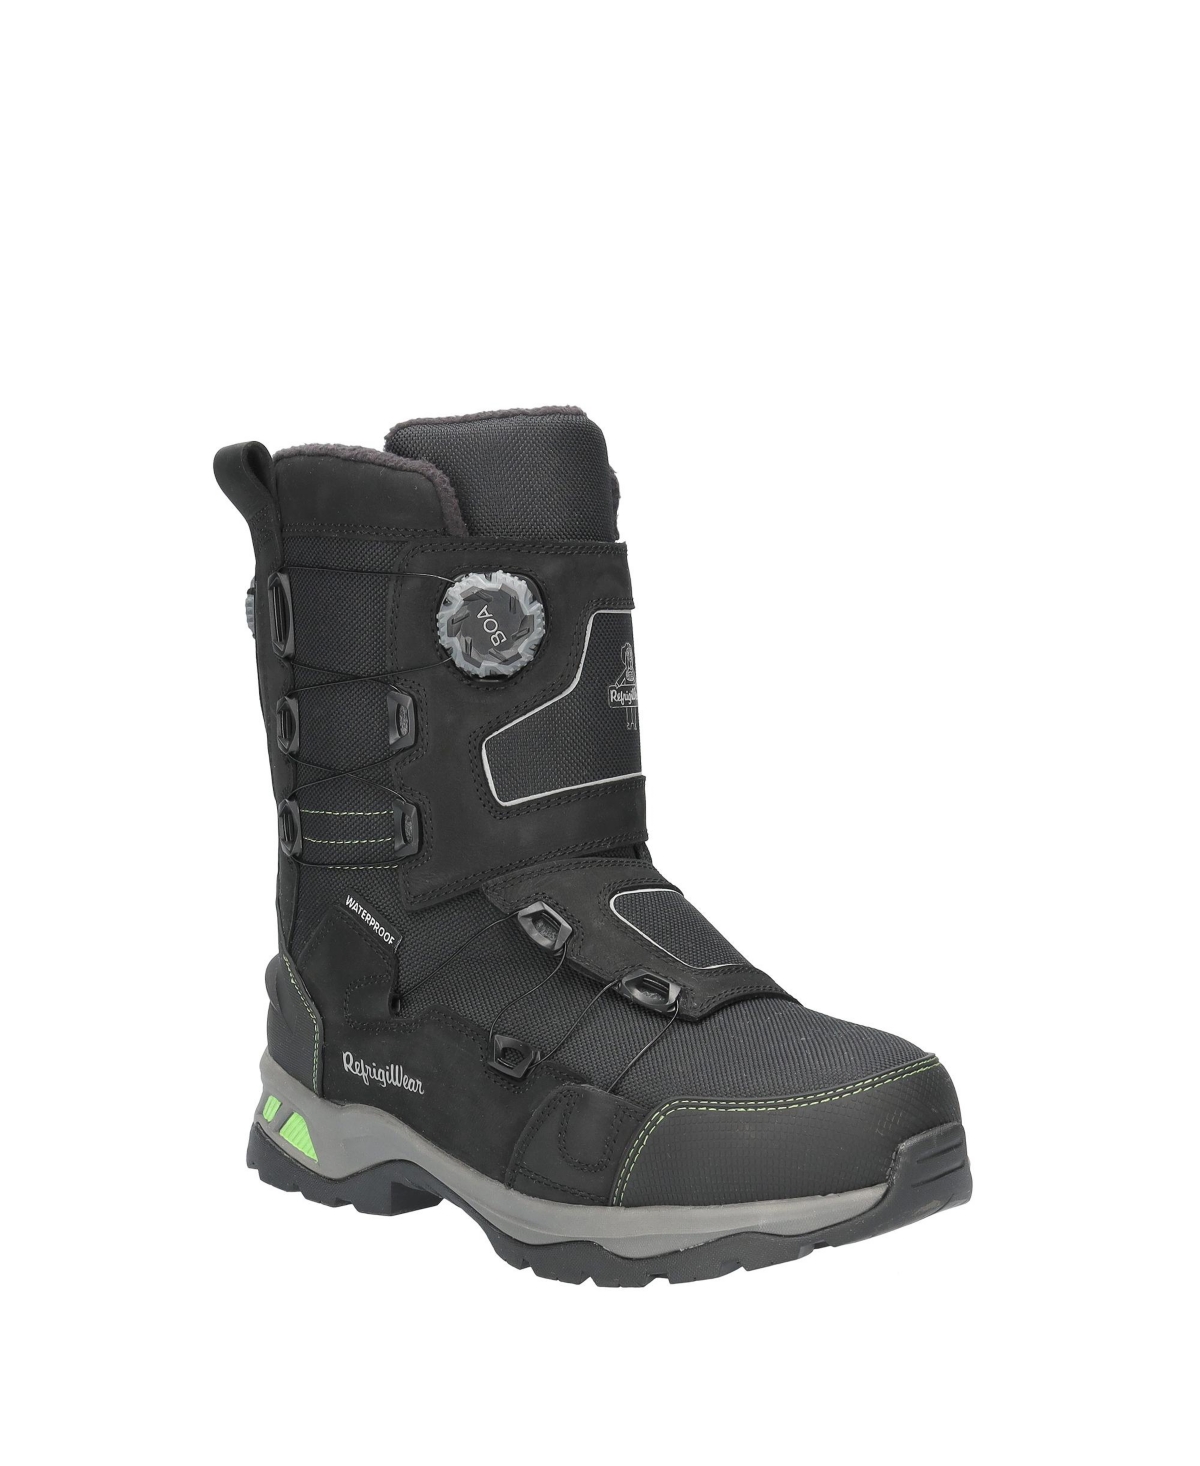 Men's Extreme Double Dial, Insulated Waterproof Pac Leather Work Boots - Black